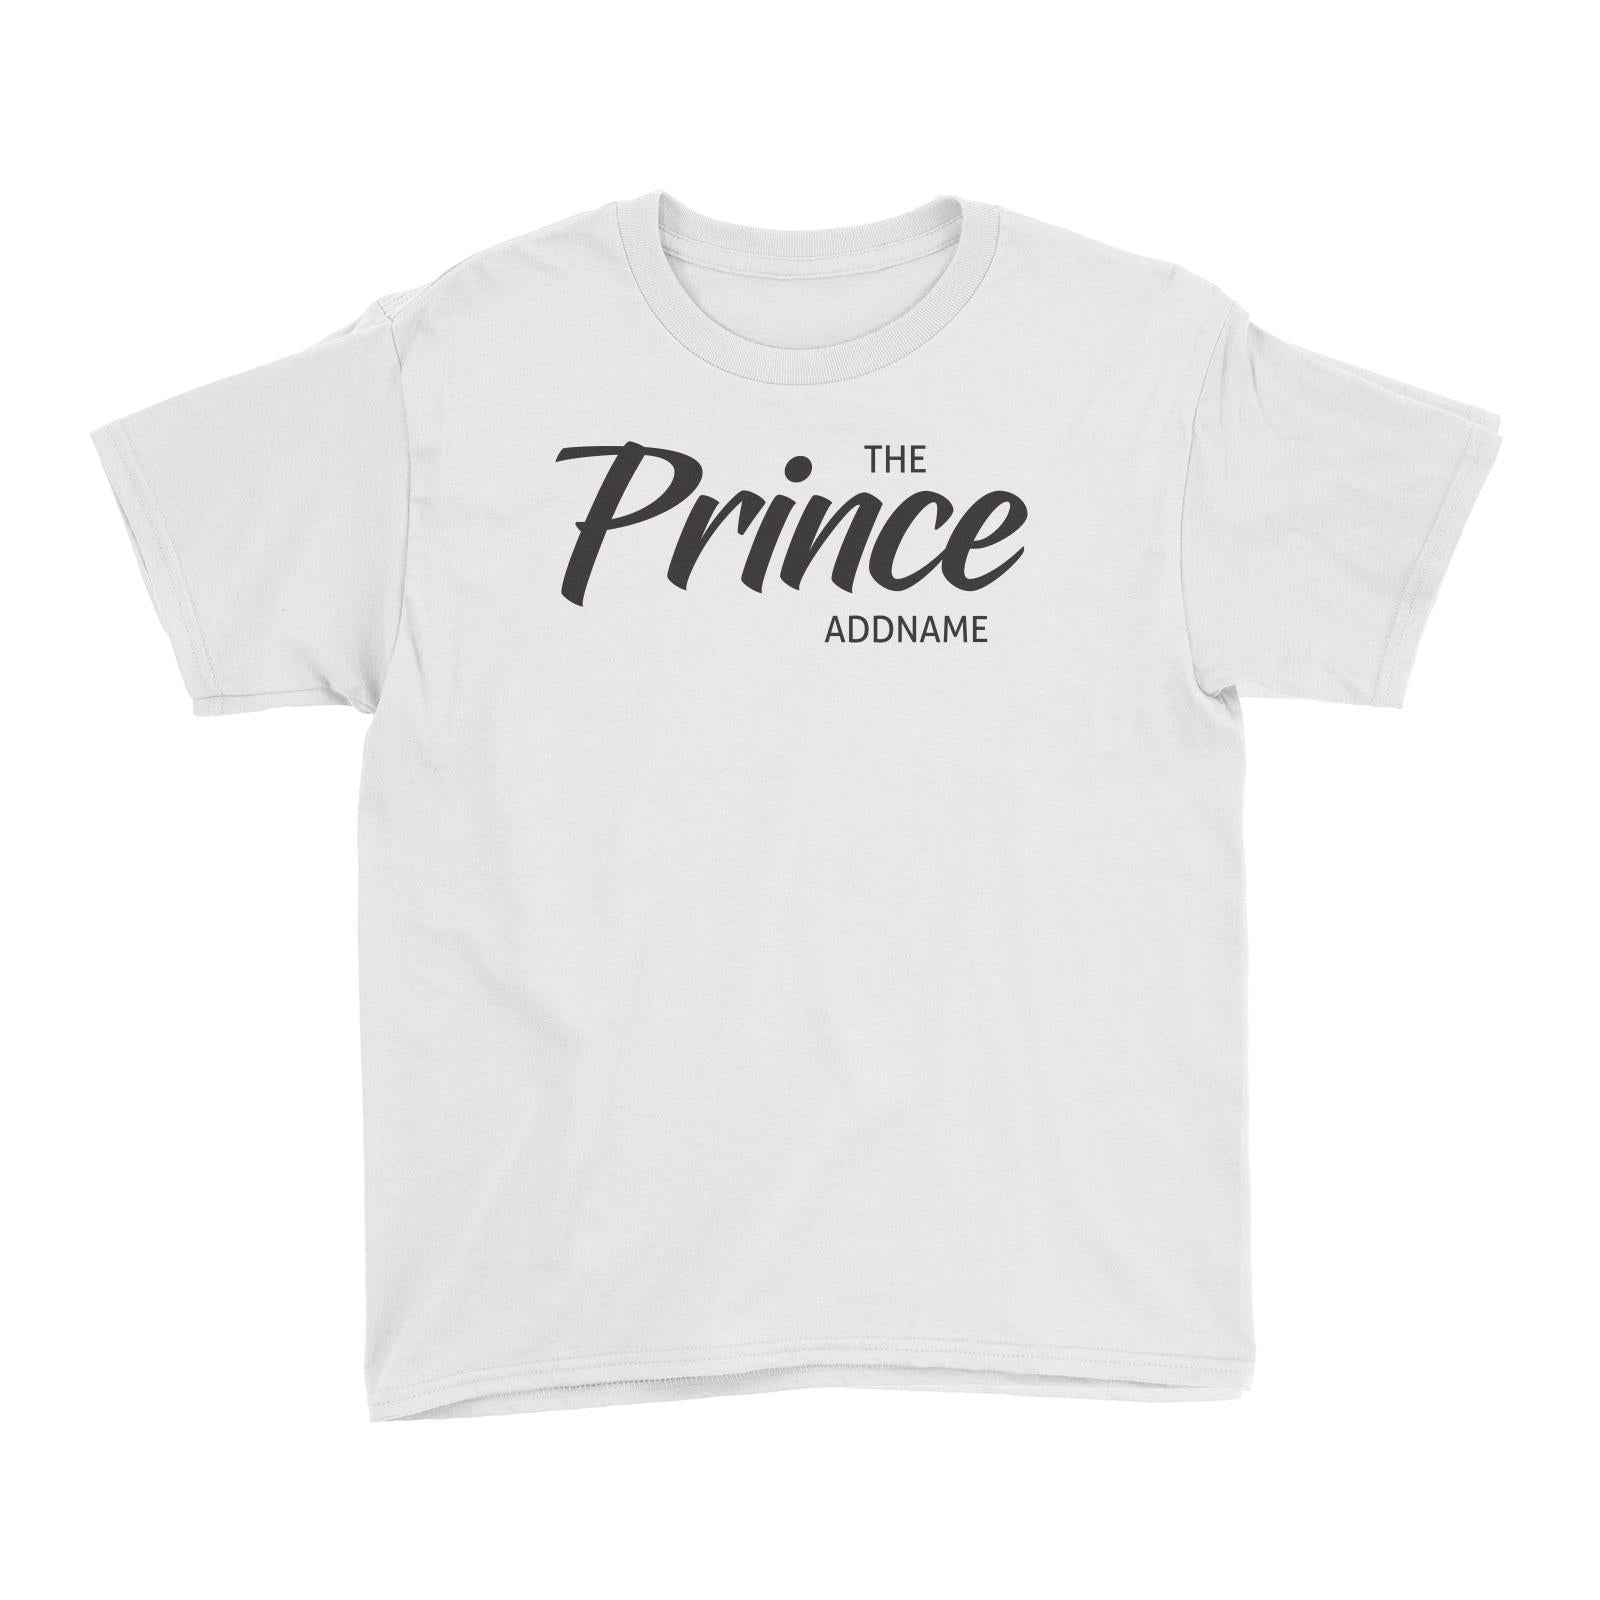 The Prince Addname Kid's T-Shirt Personalizable Designs Matching Family Royal Family Edition Royal Simple